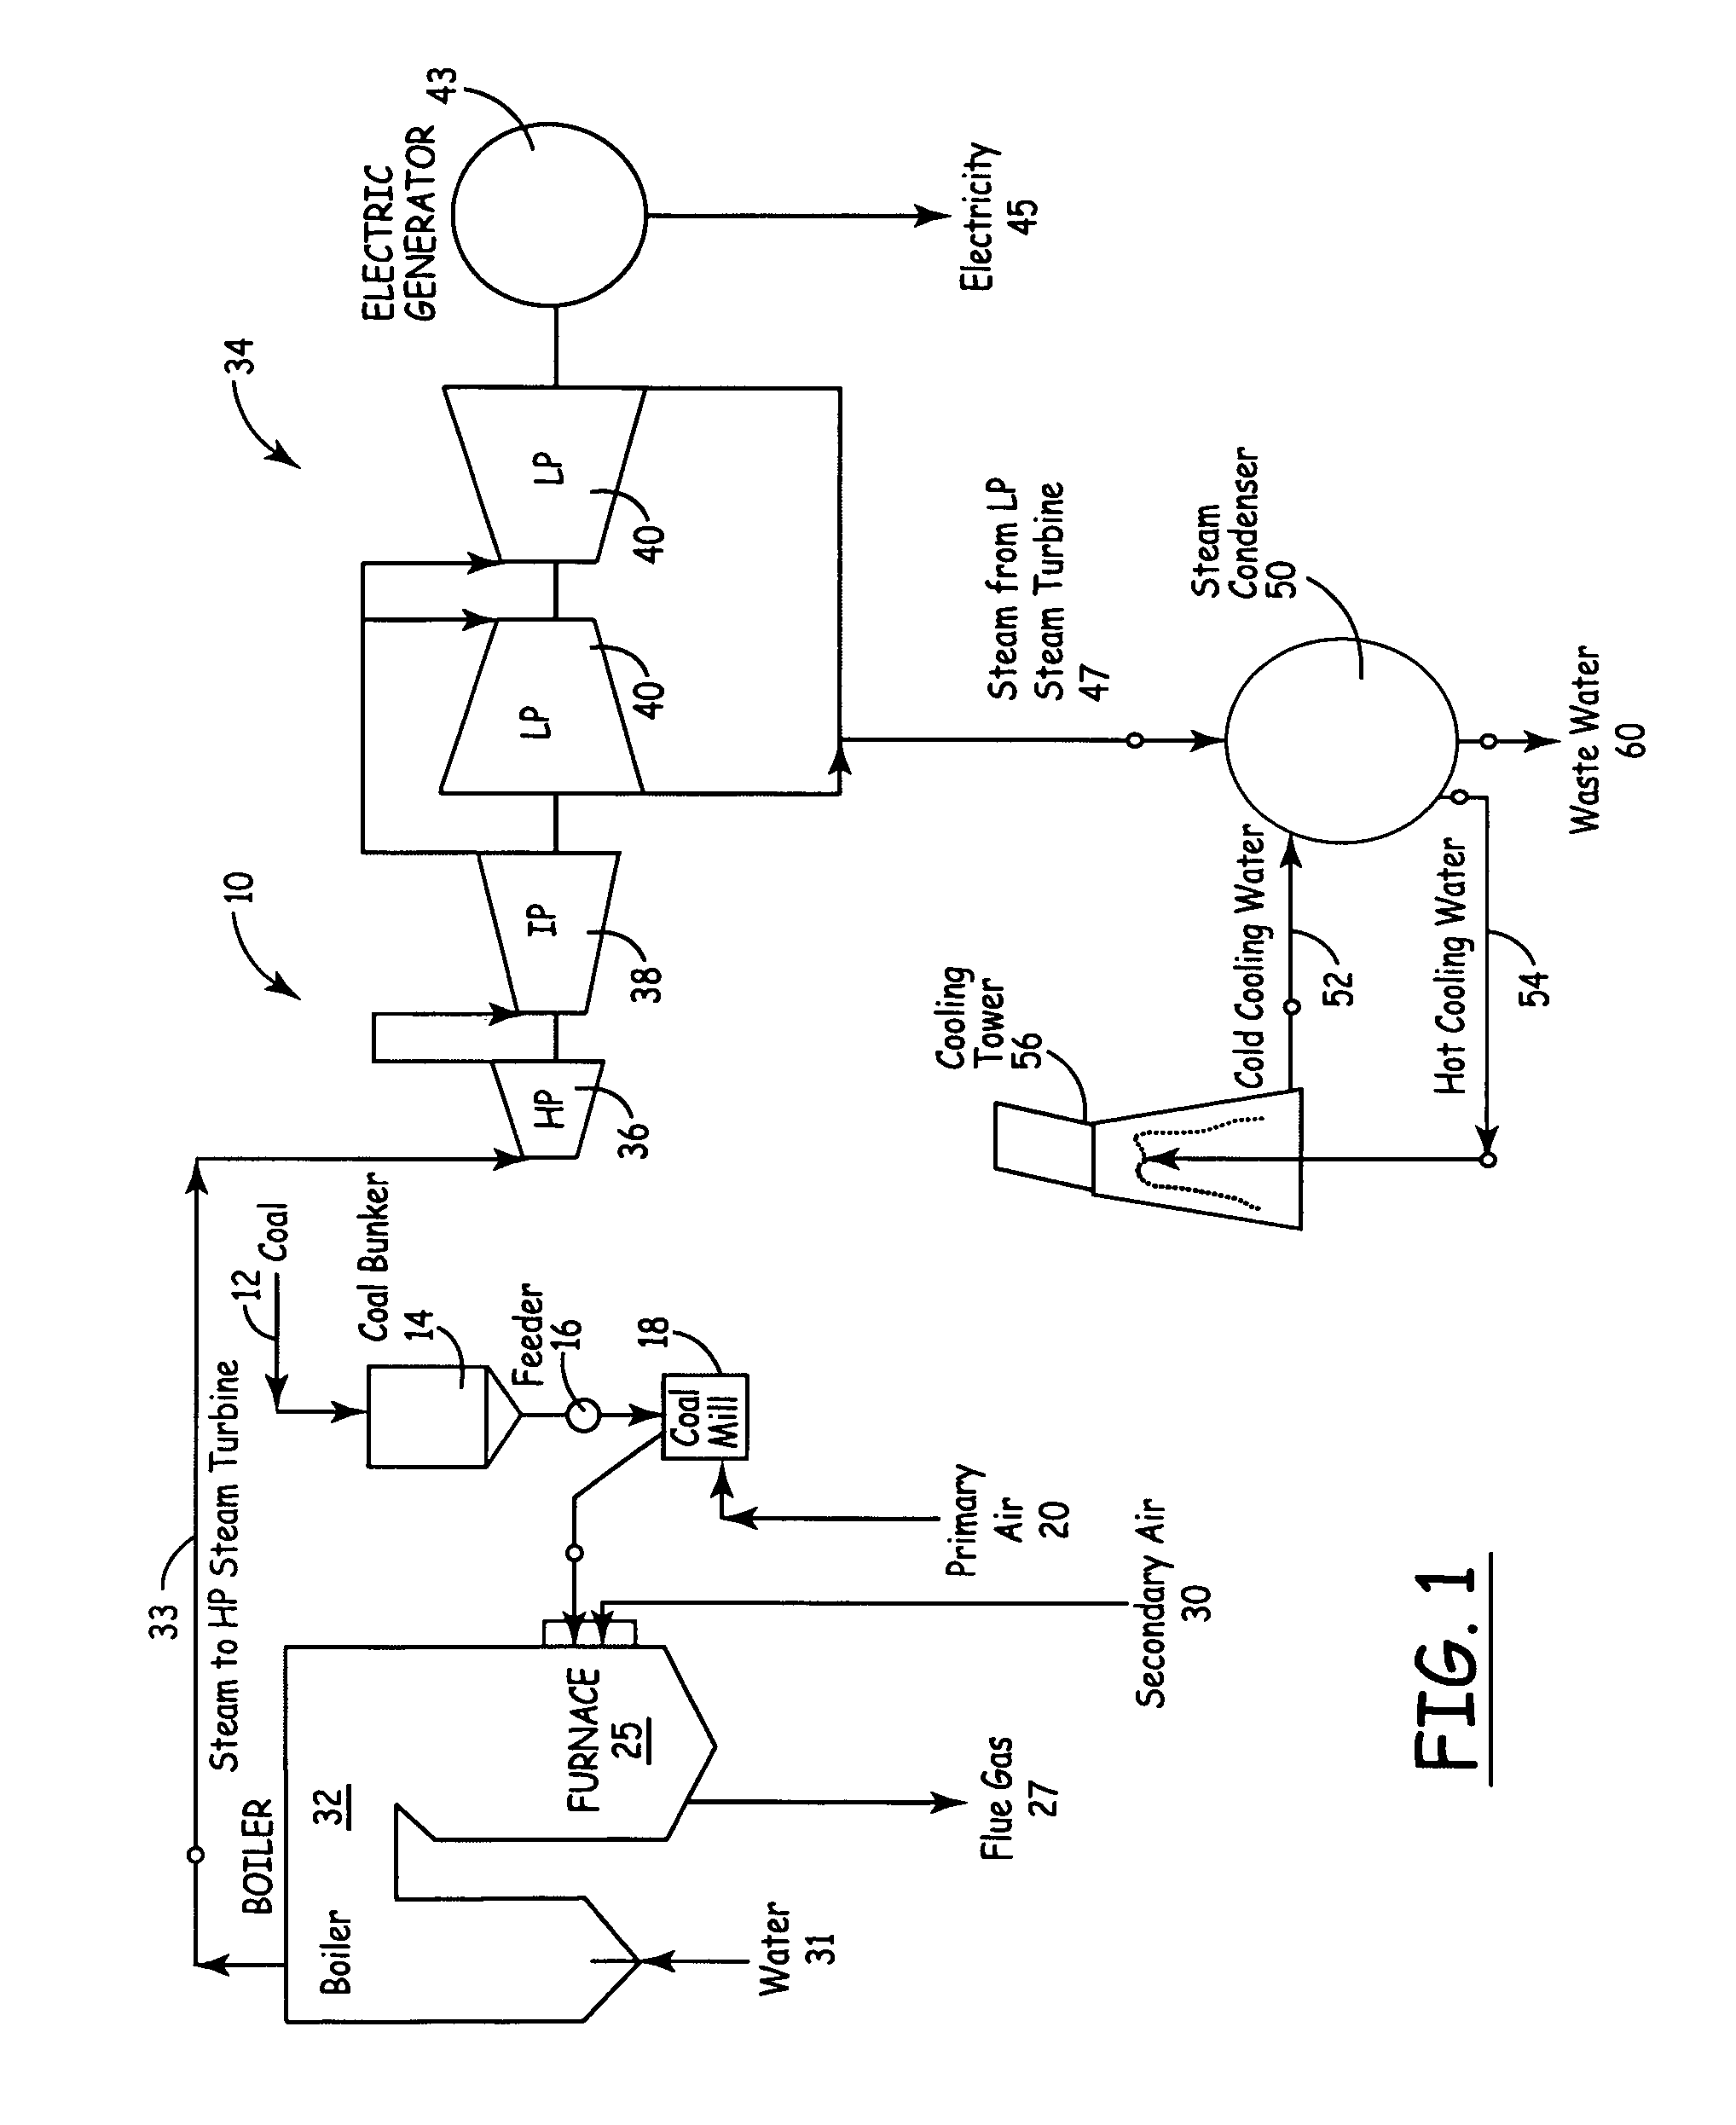 Apparatus for heat treatment of particulate materials